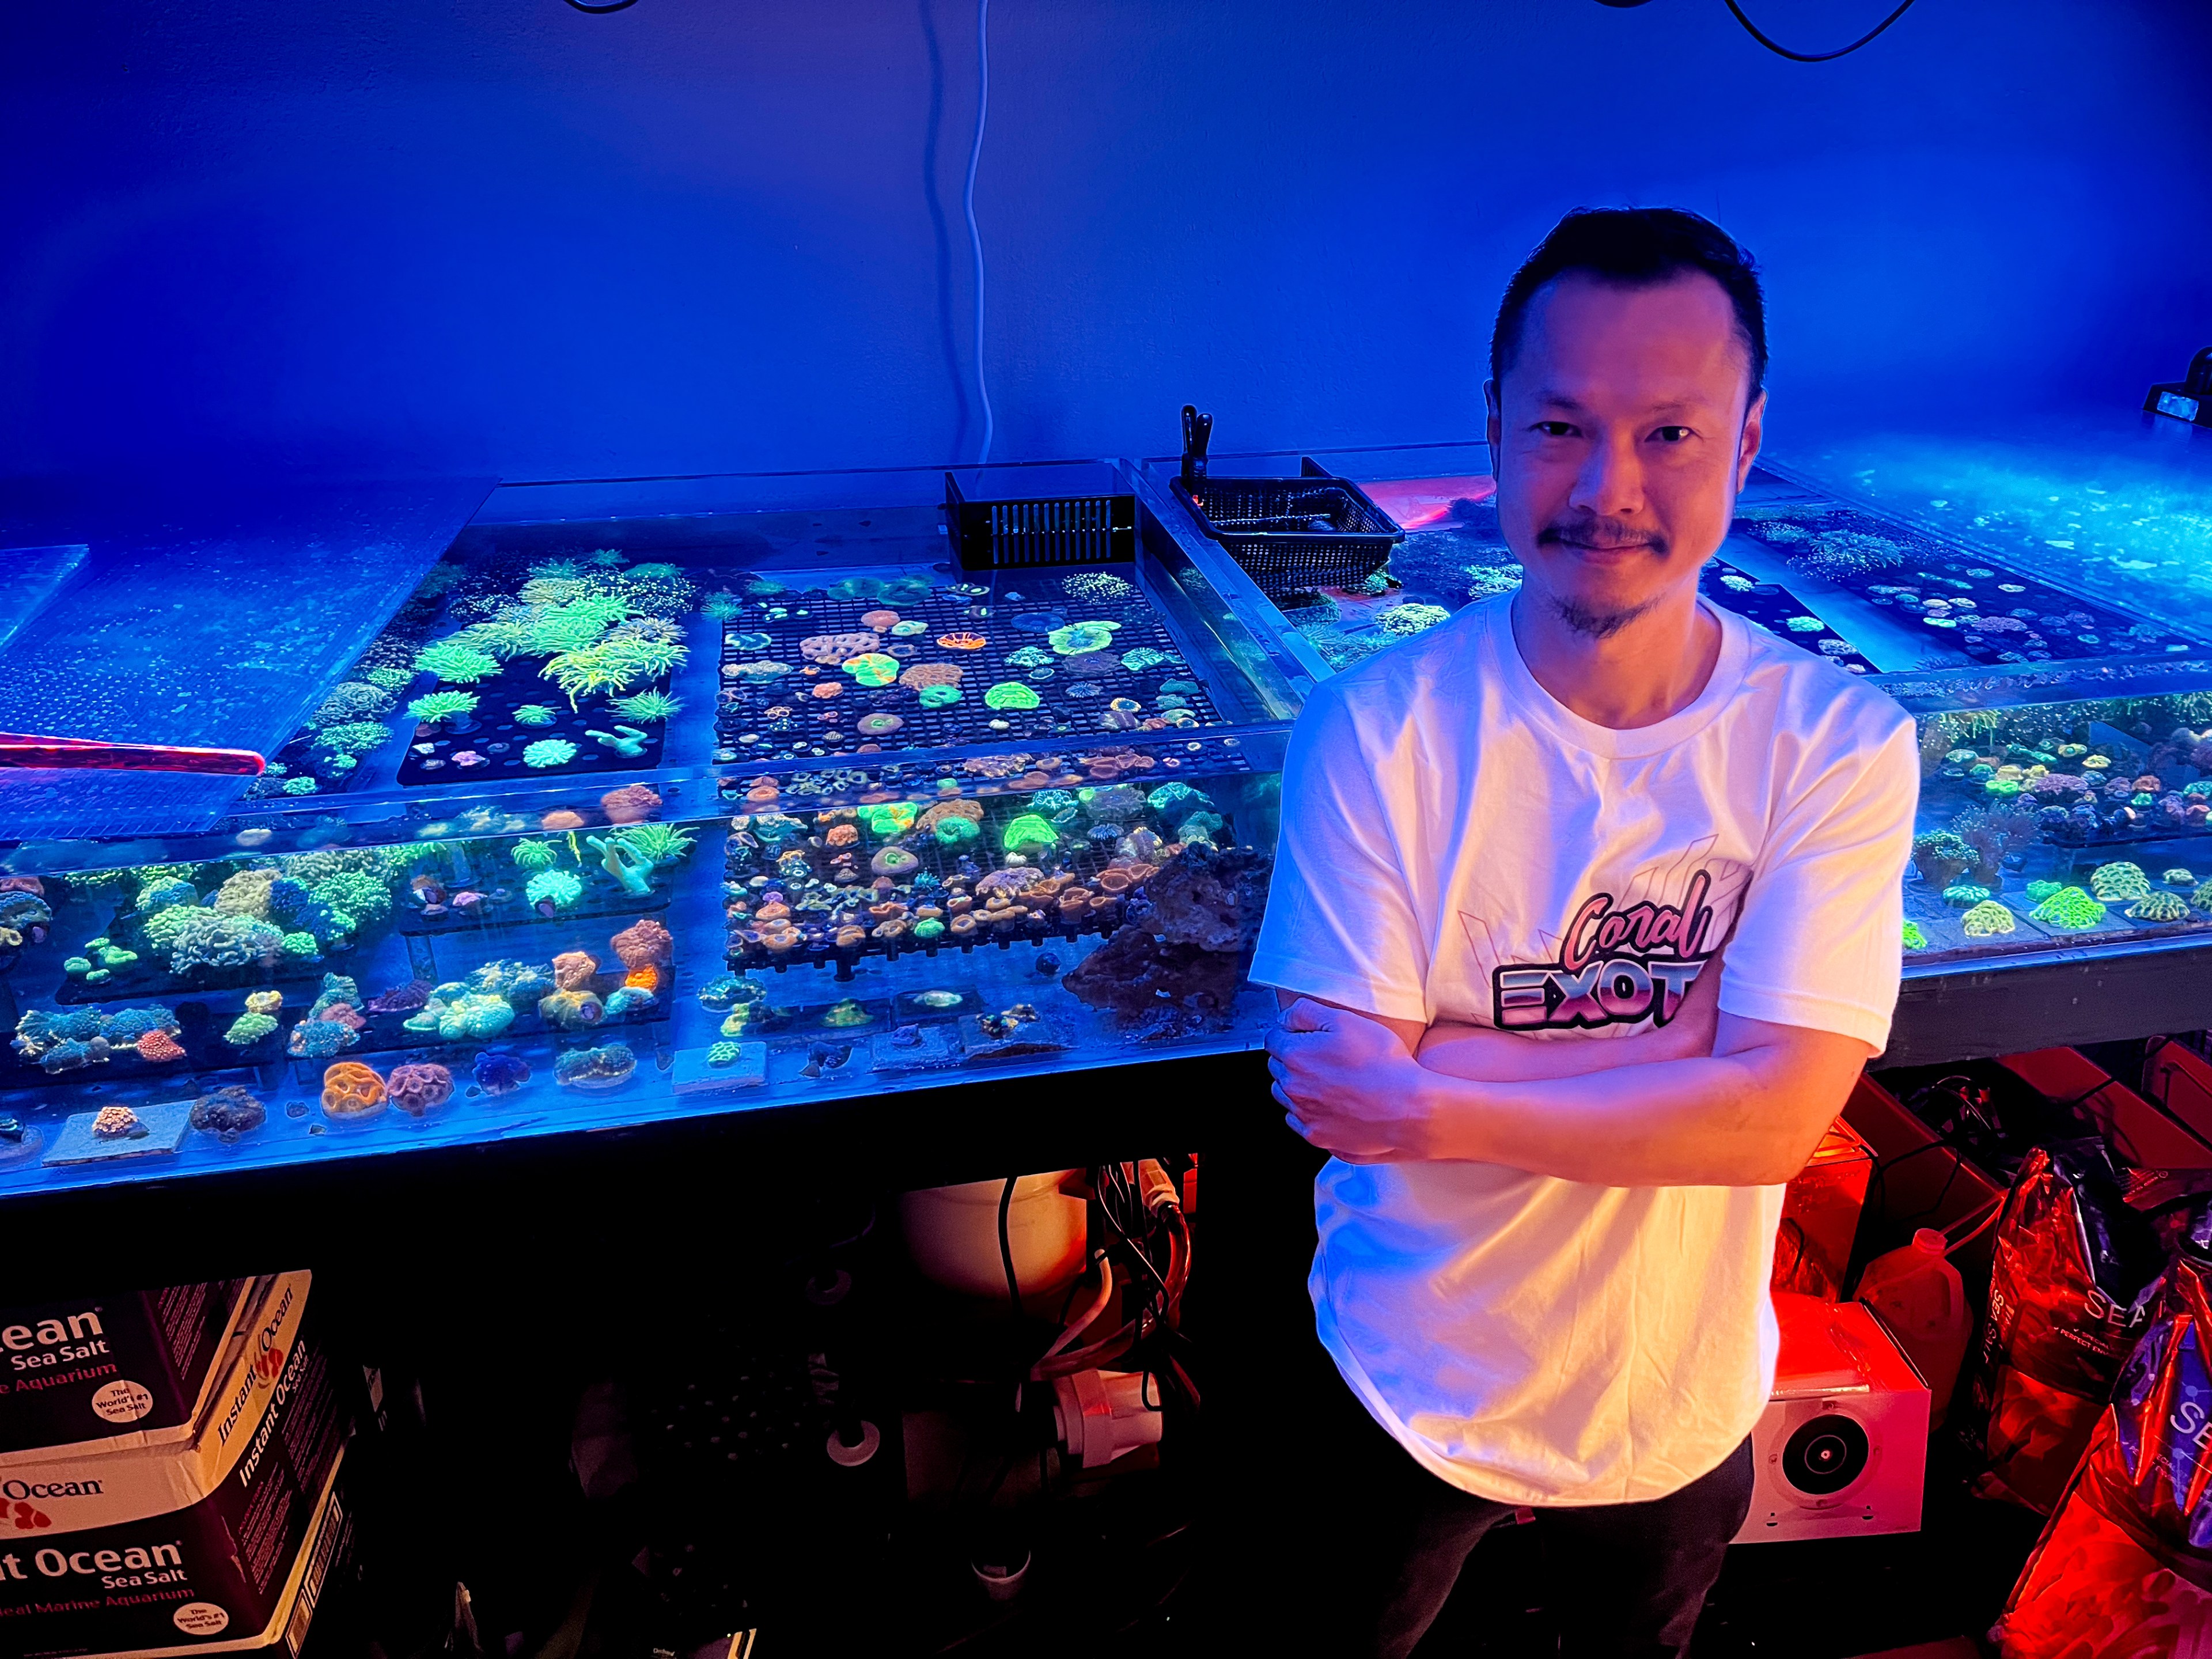 A man smiles, standing beside vibrant coral tanks under blue lighting, arms crossed, wearing a white T-shirt.